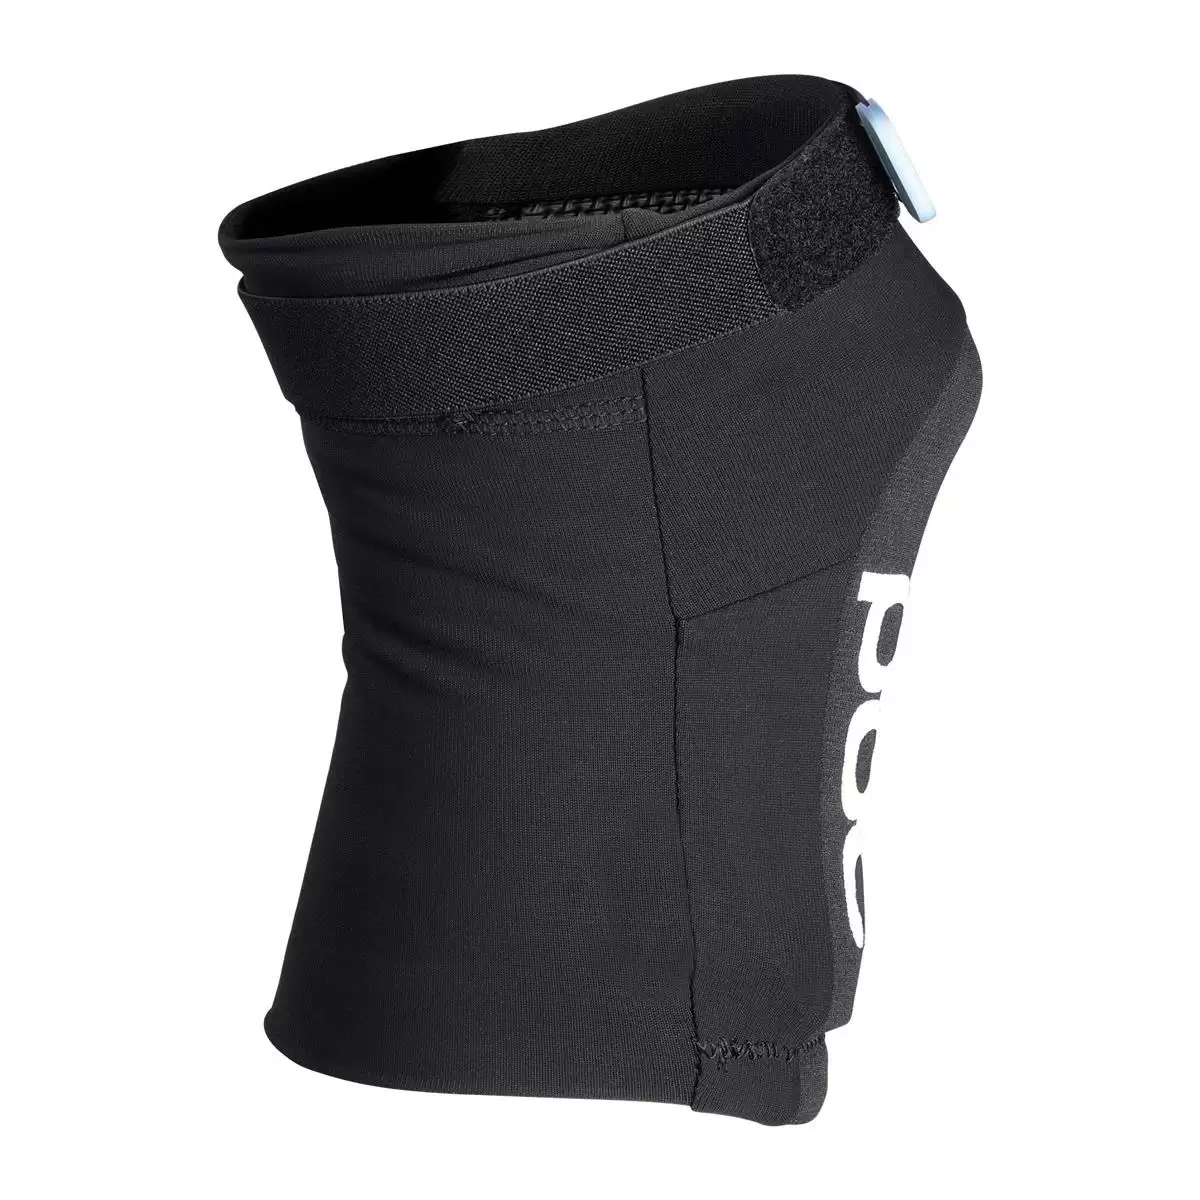 Joint VPD Air Knee pads black Size L #2